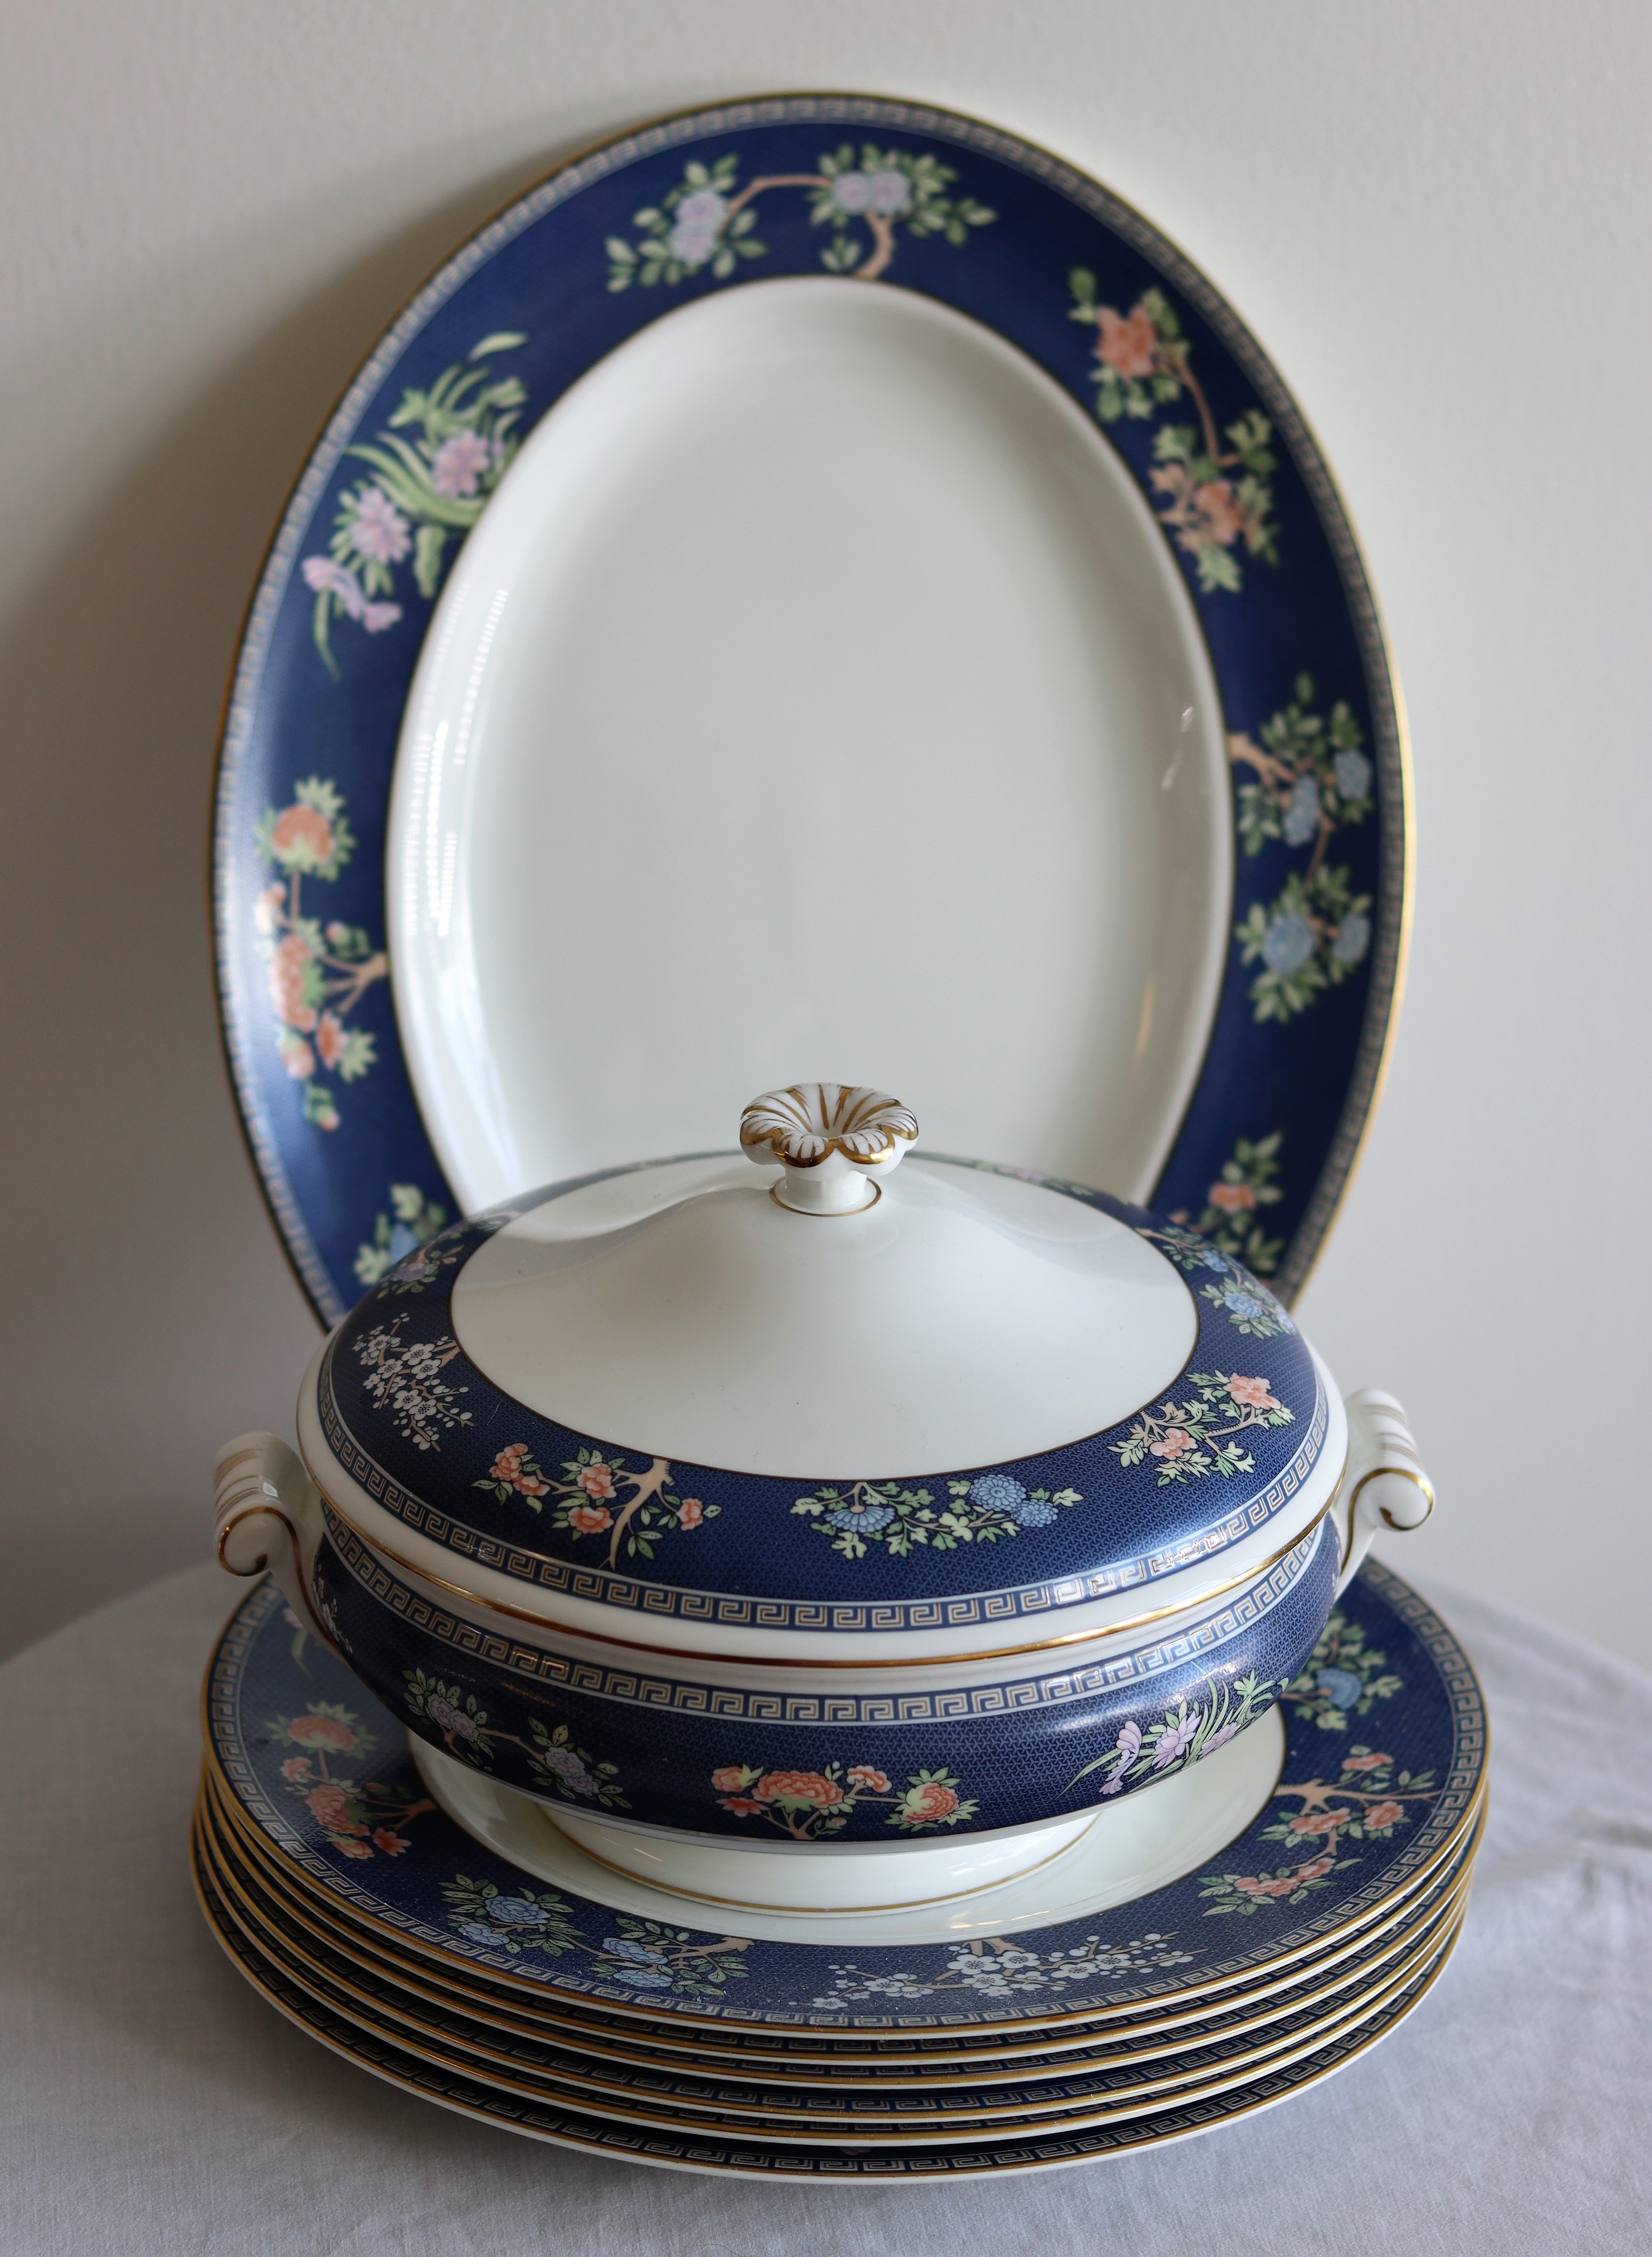 A Wedgwood Blue Siam tureen with plates and basting dish